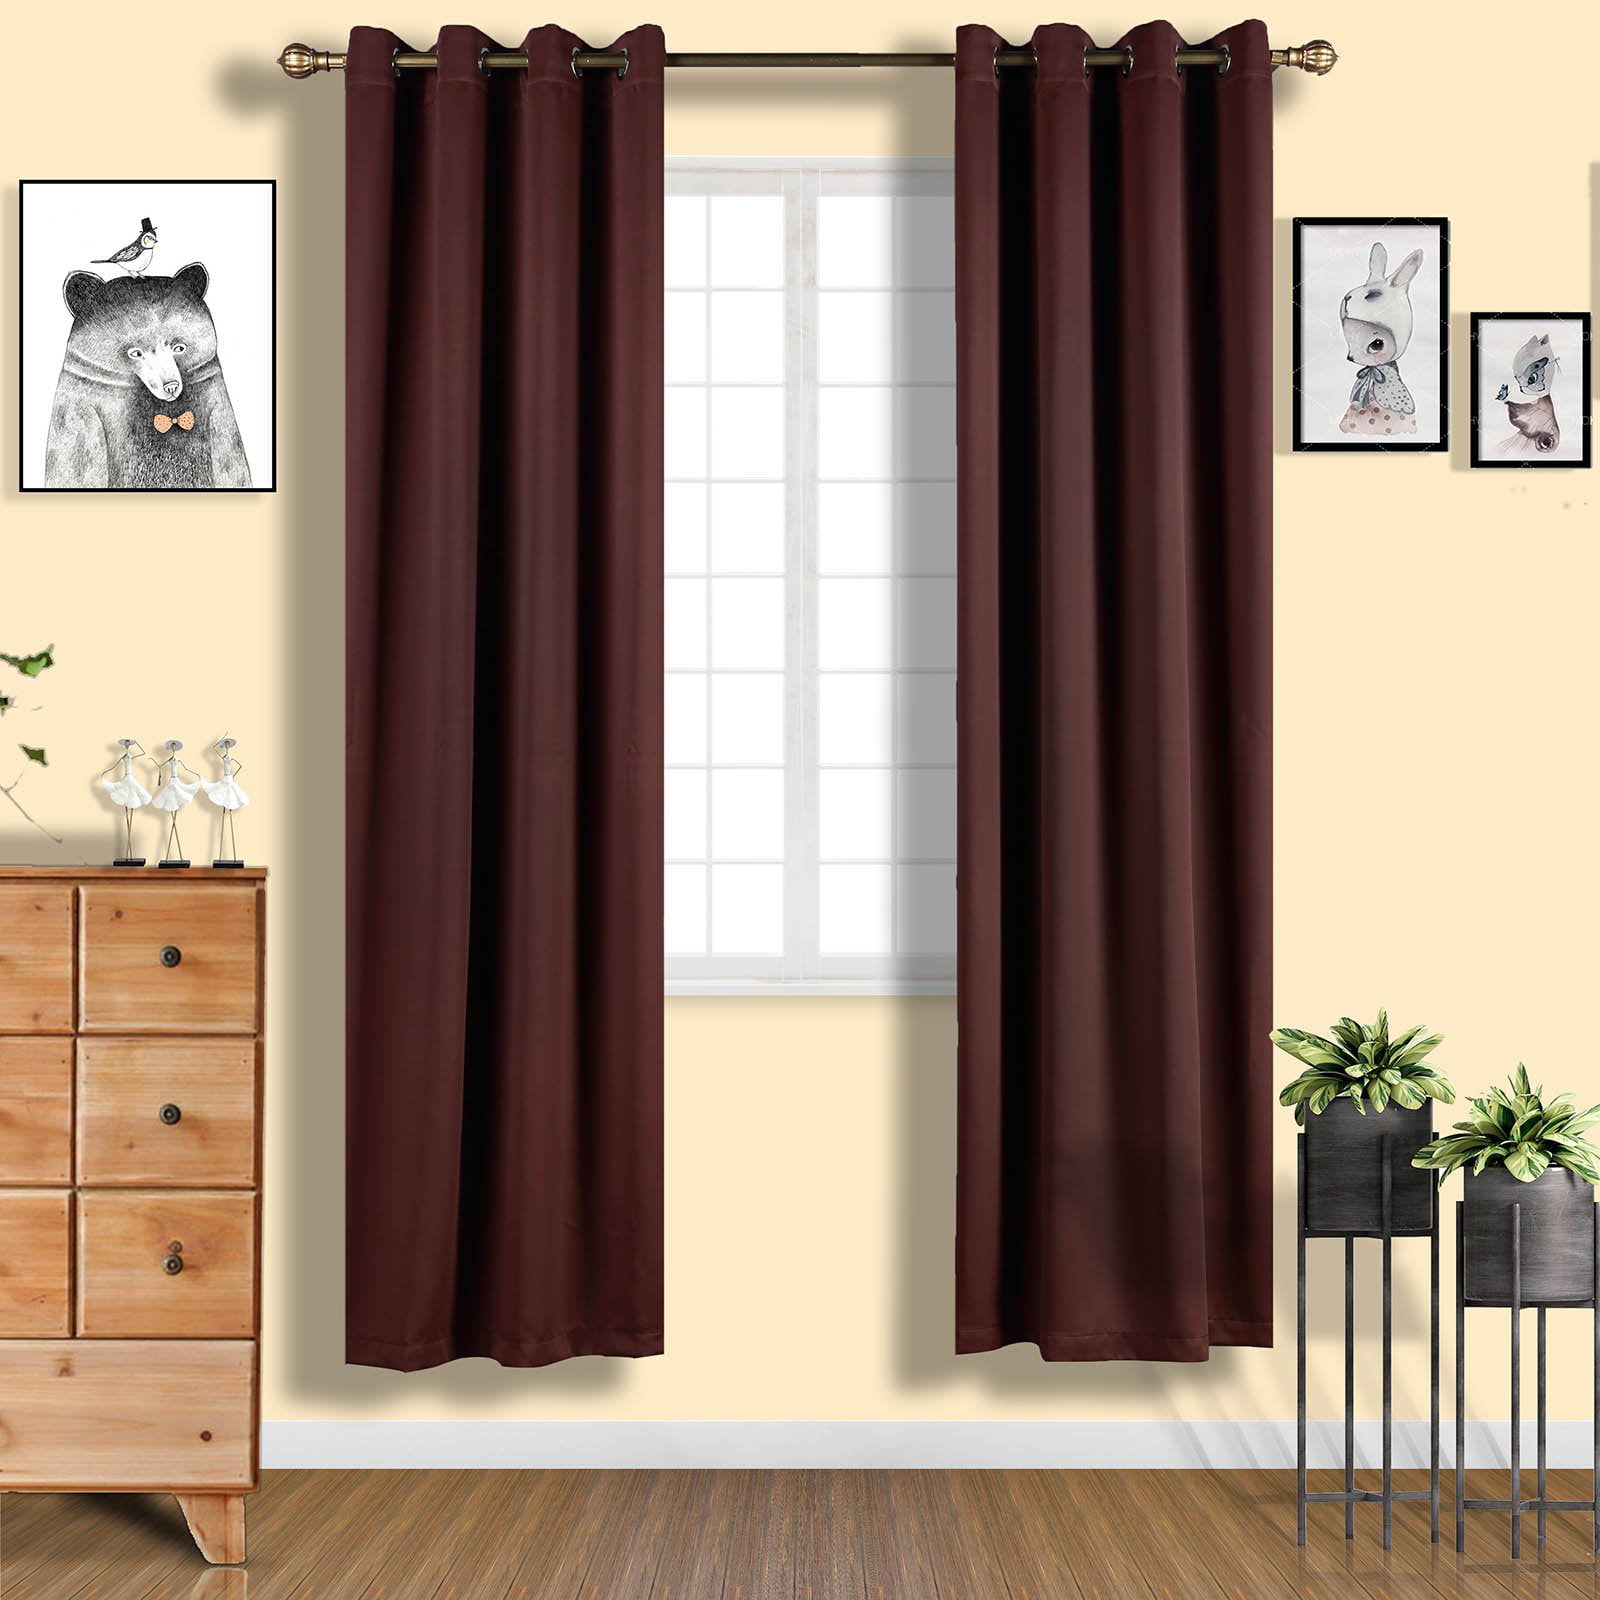 Chocolate Soundproof Curtains | 2 Packs | 52 x 96 Inch Blackout